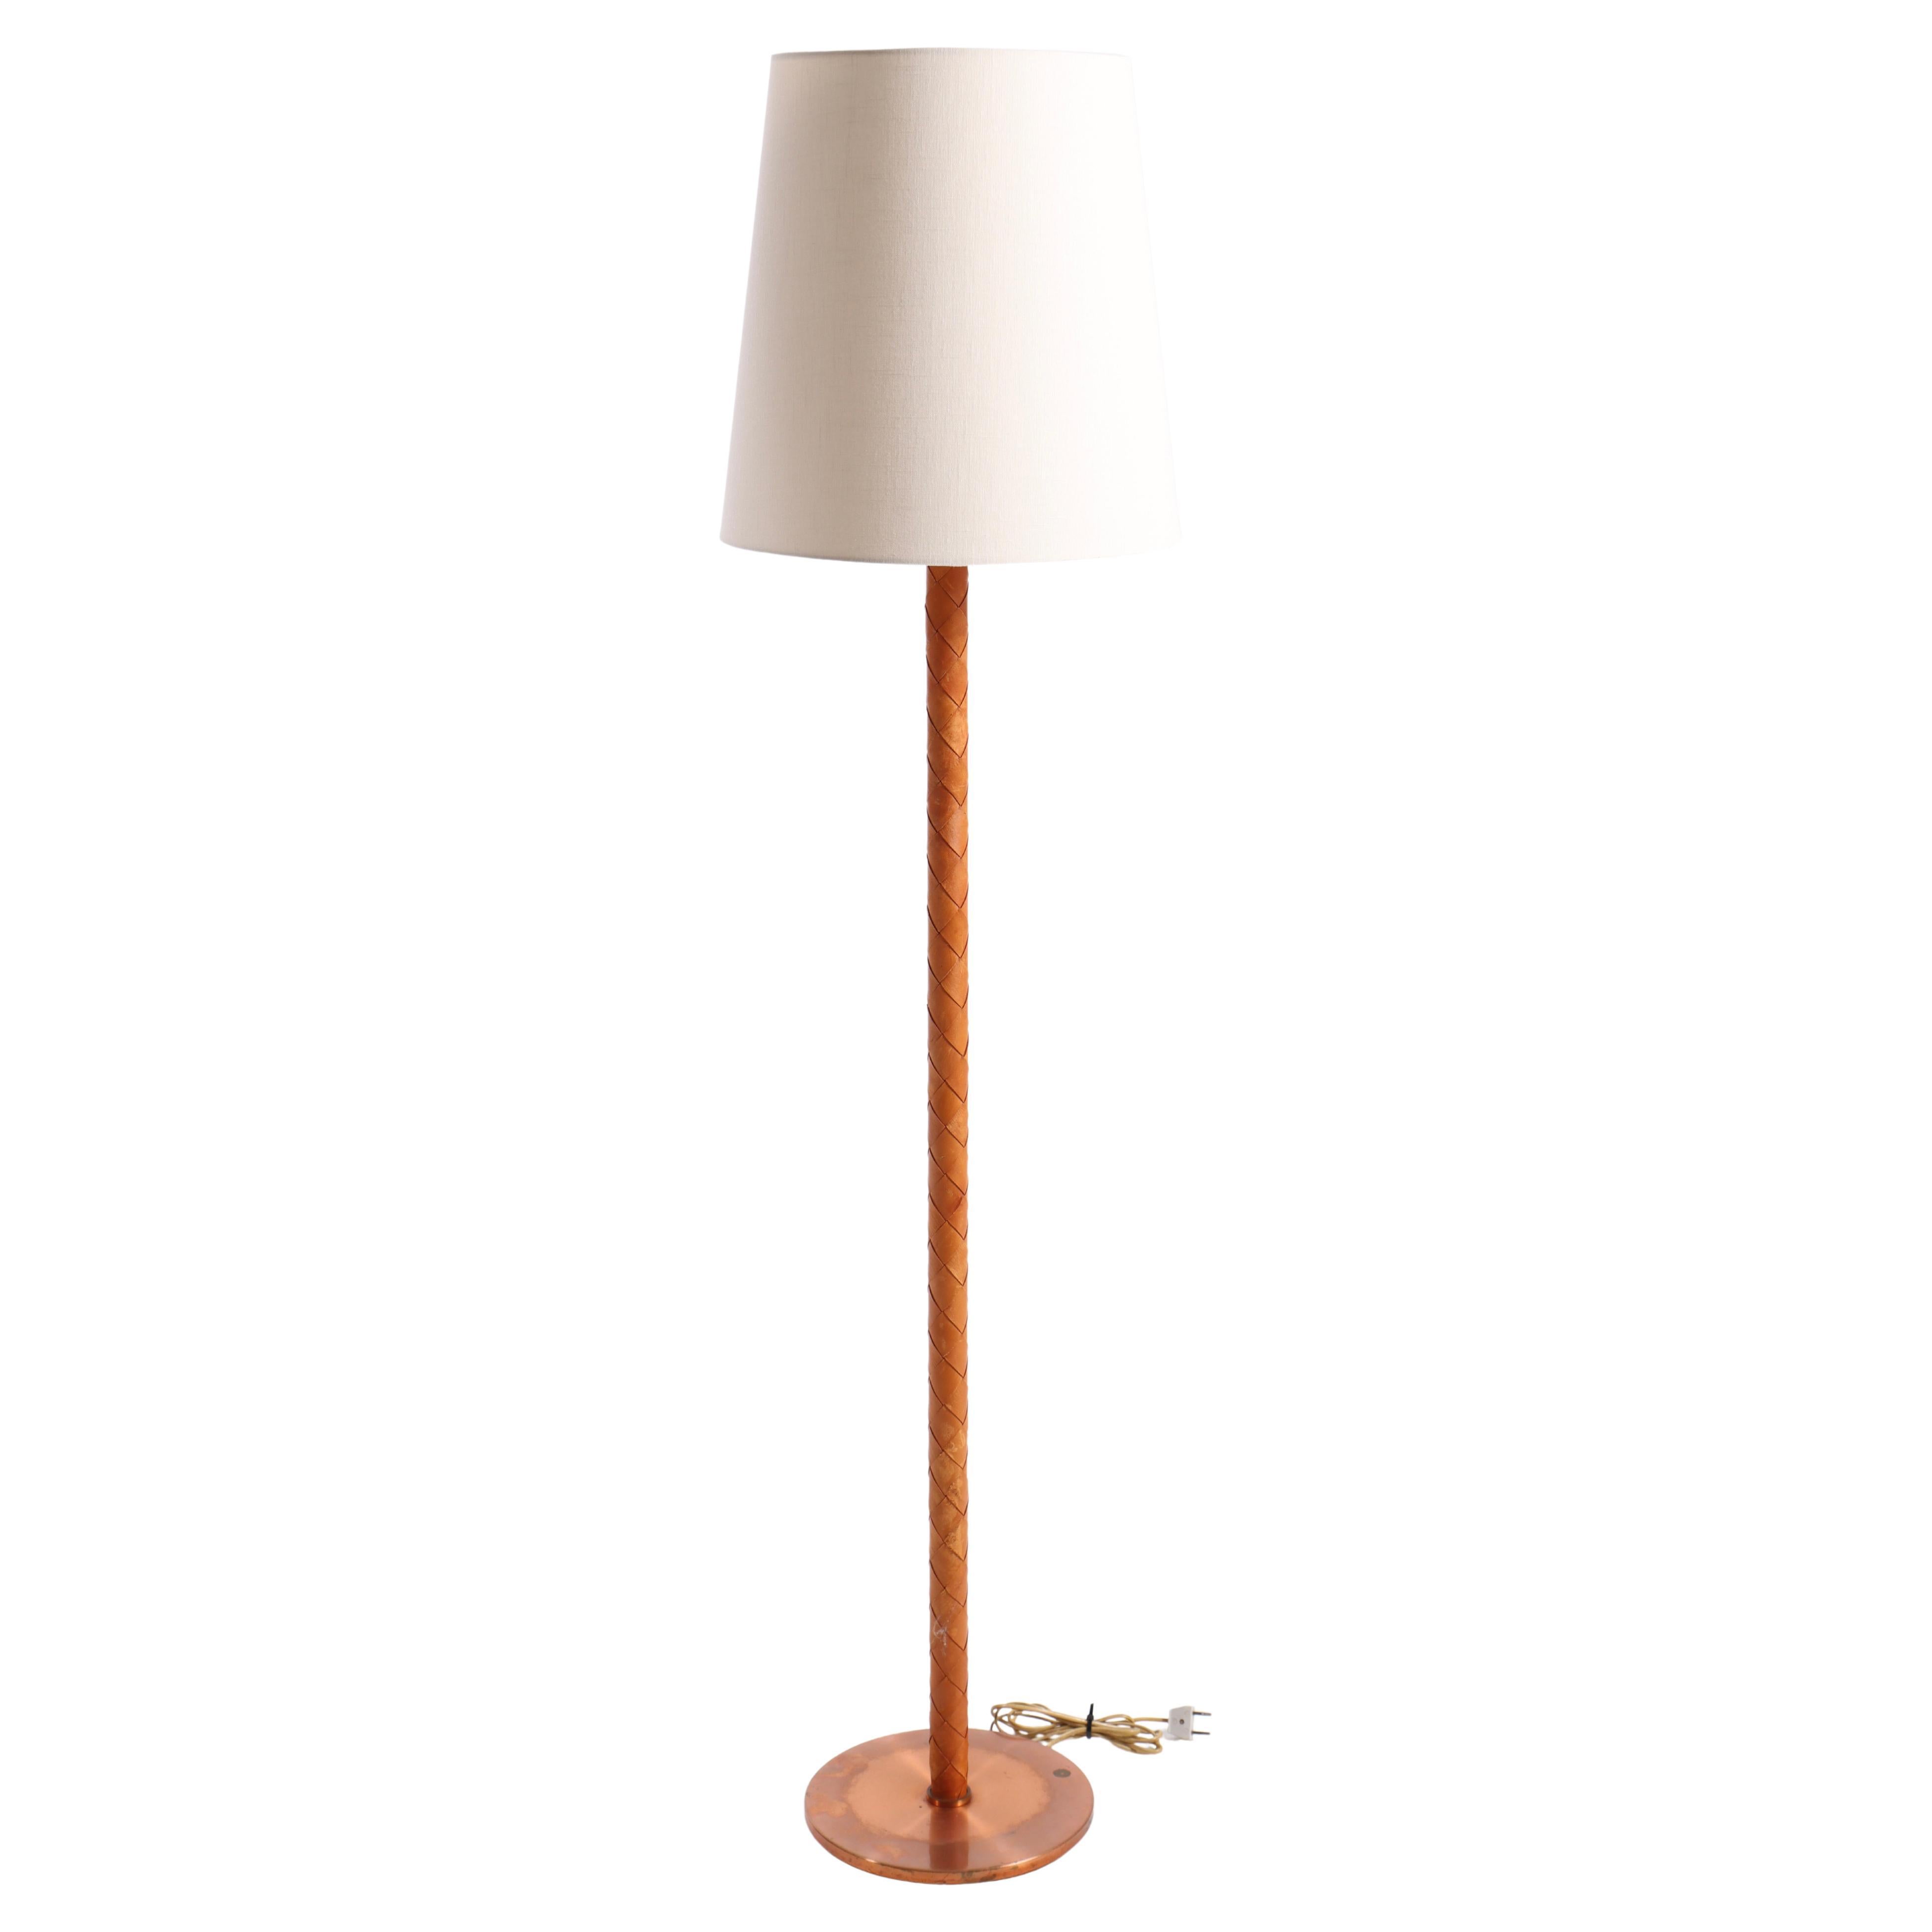 Floor Lamp in Copper and Leather Designed by Jo Hammerborg, 1950s For Sale